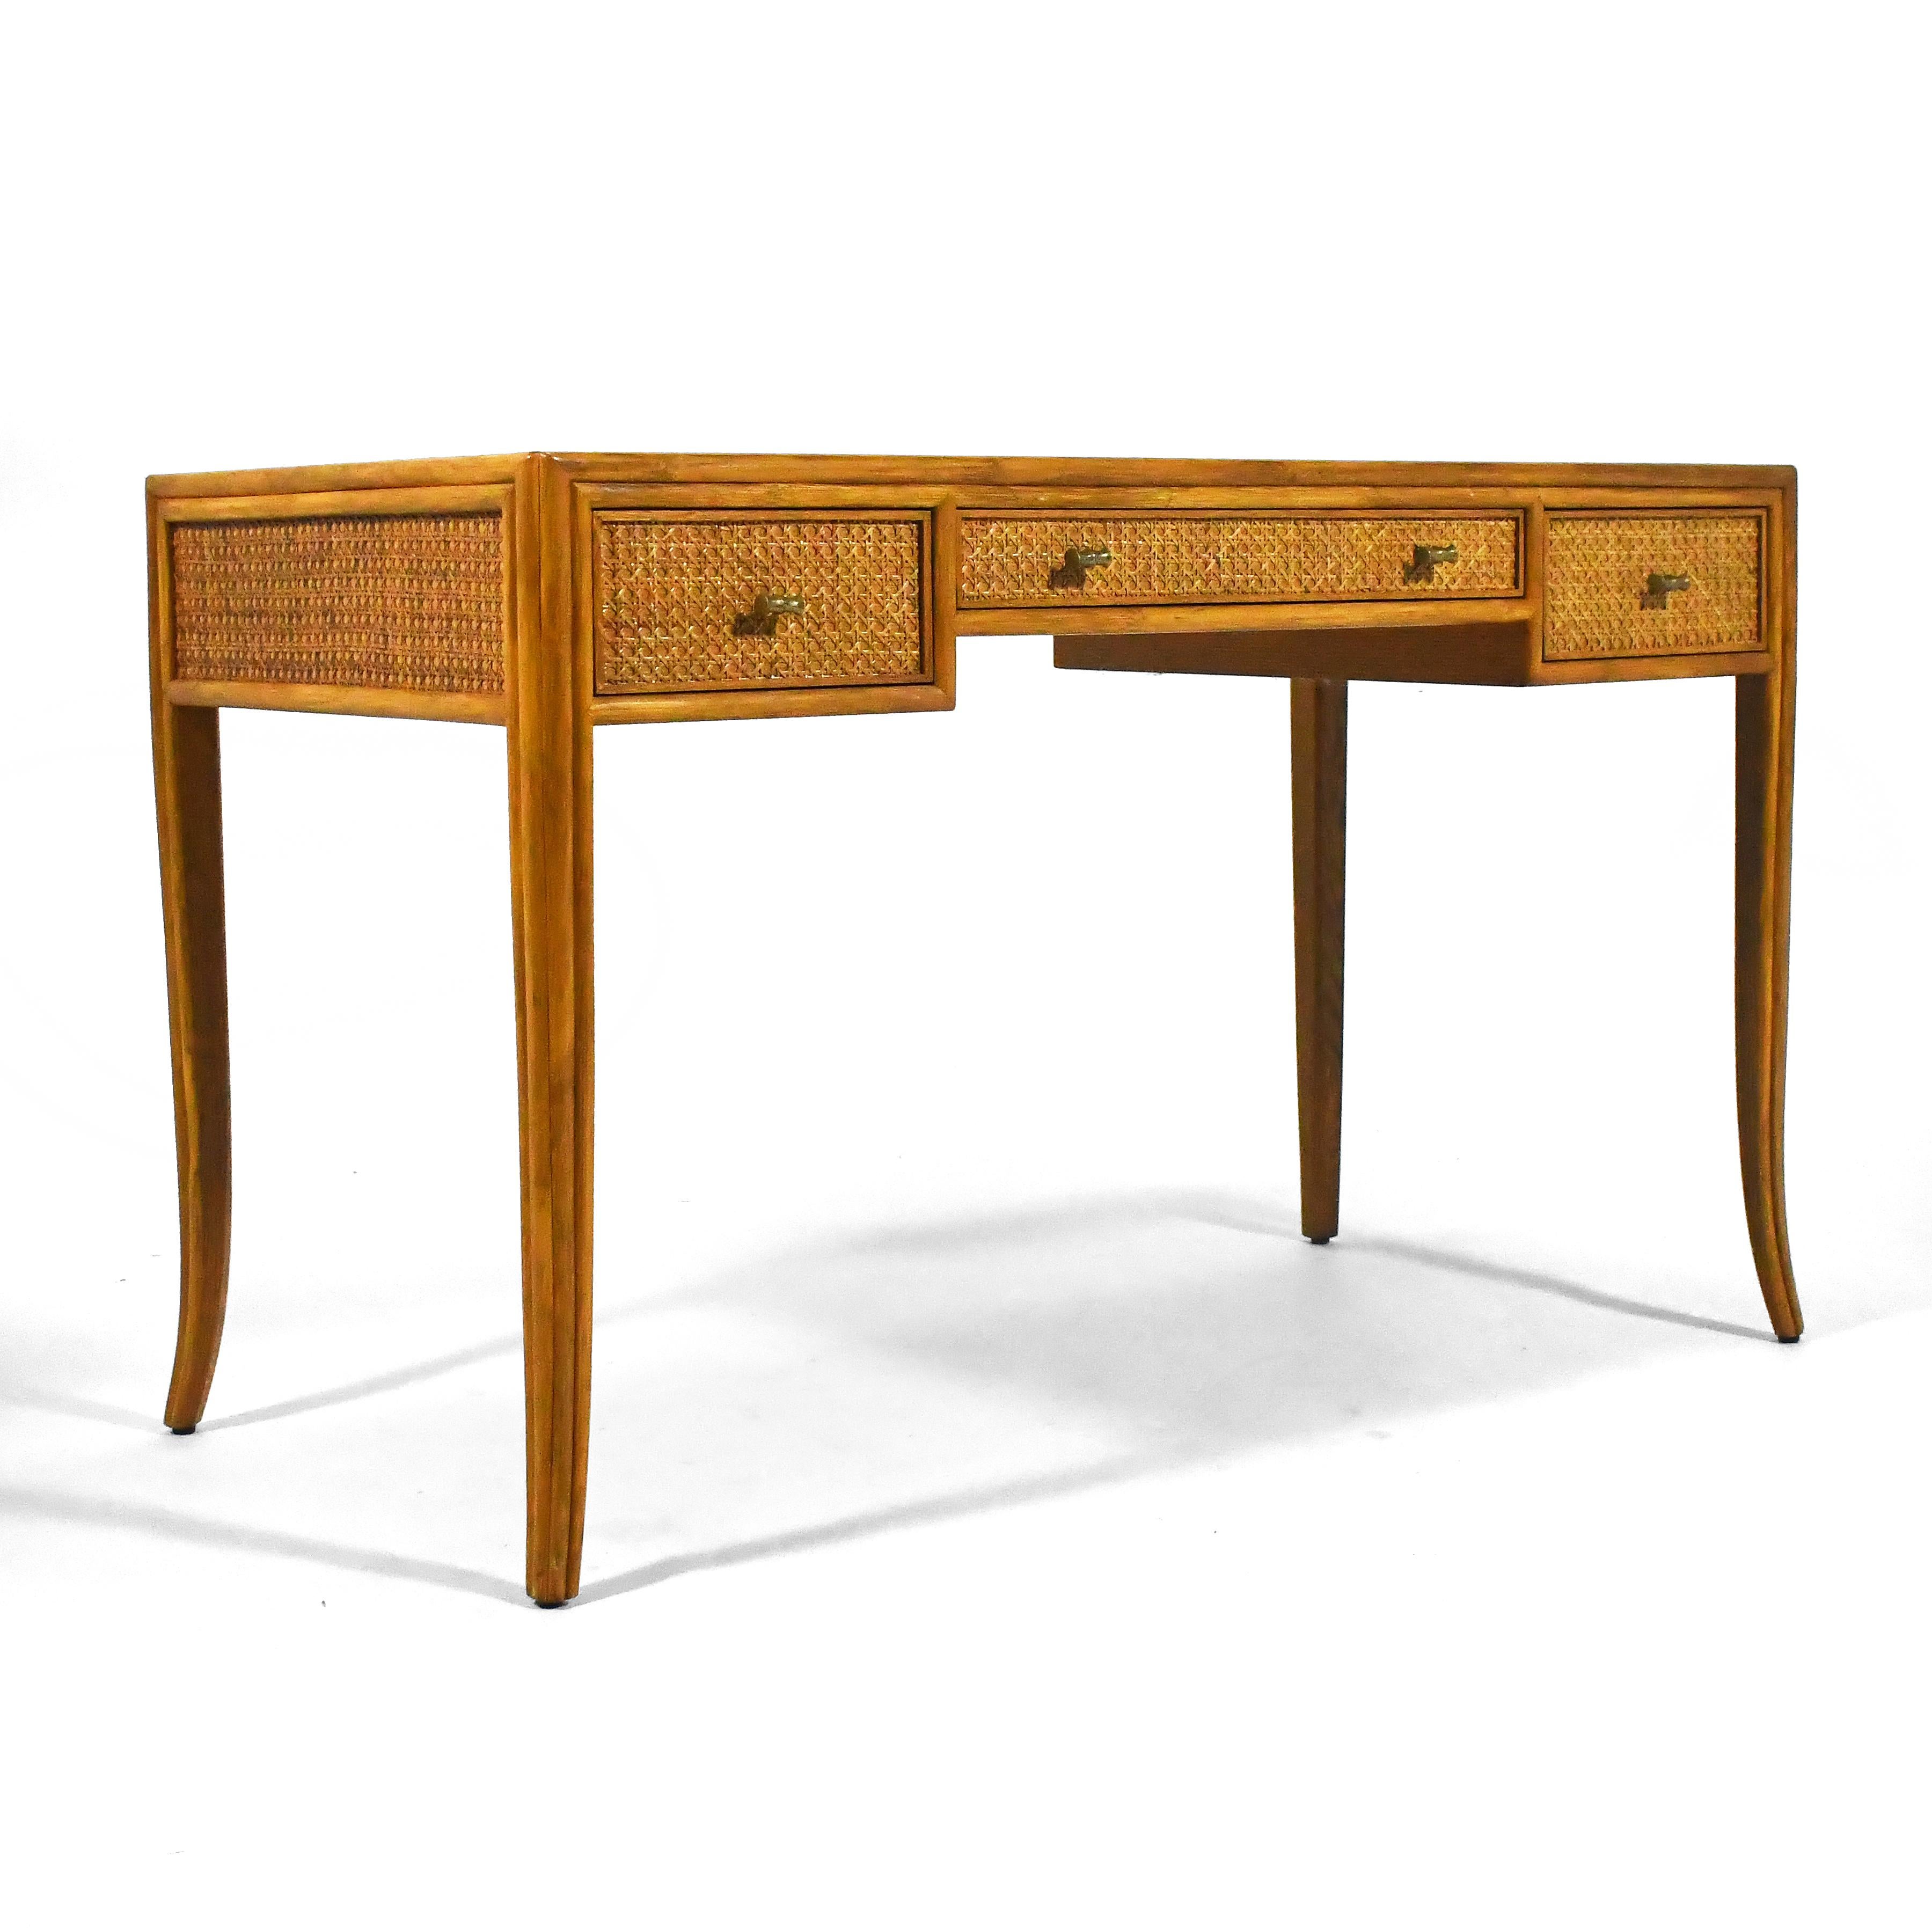 This exquisite design by Elinor McGuire for McGuire of San Fransisco is an exercise in subtle beauty and refined detailing. With a body covered in cane, slightly splayed legs, and solid brass bamboo-form pulls, the desk is expertly constructed and